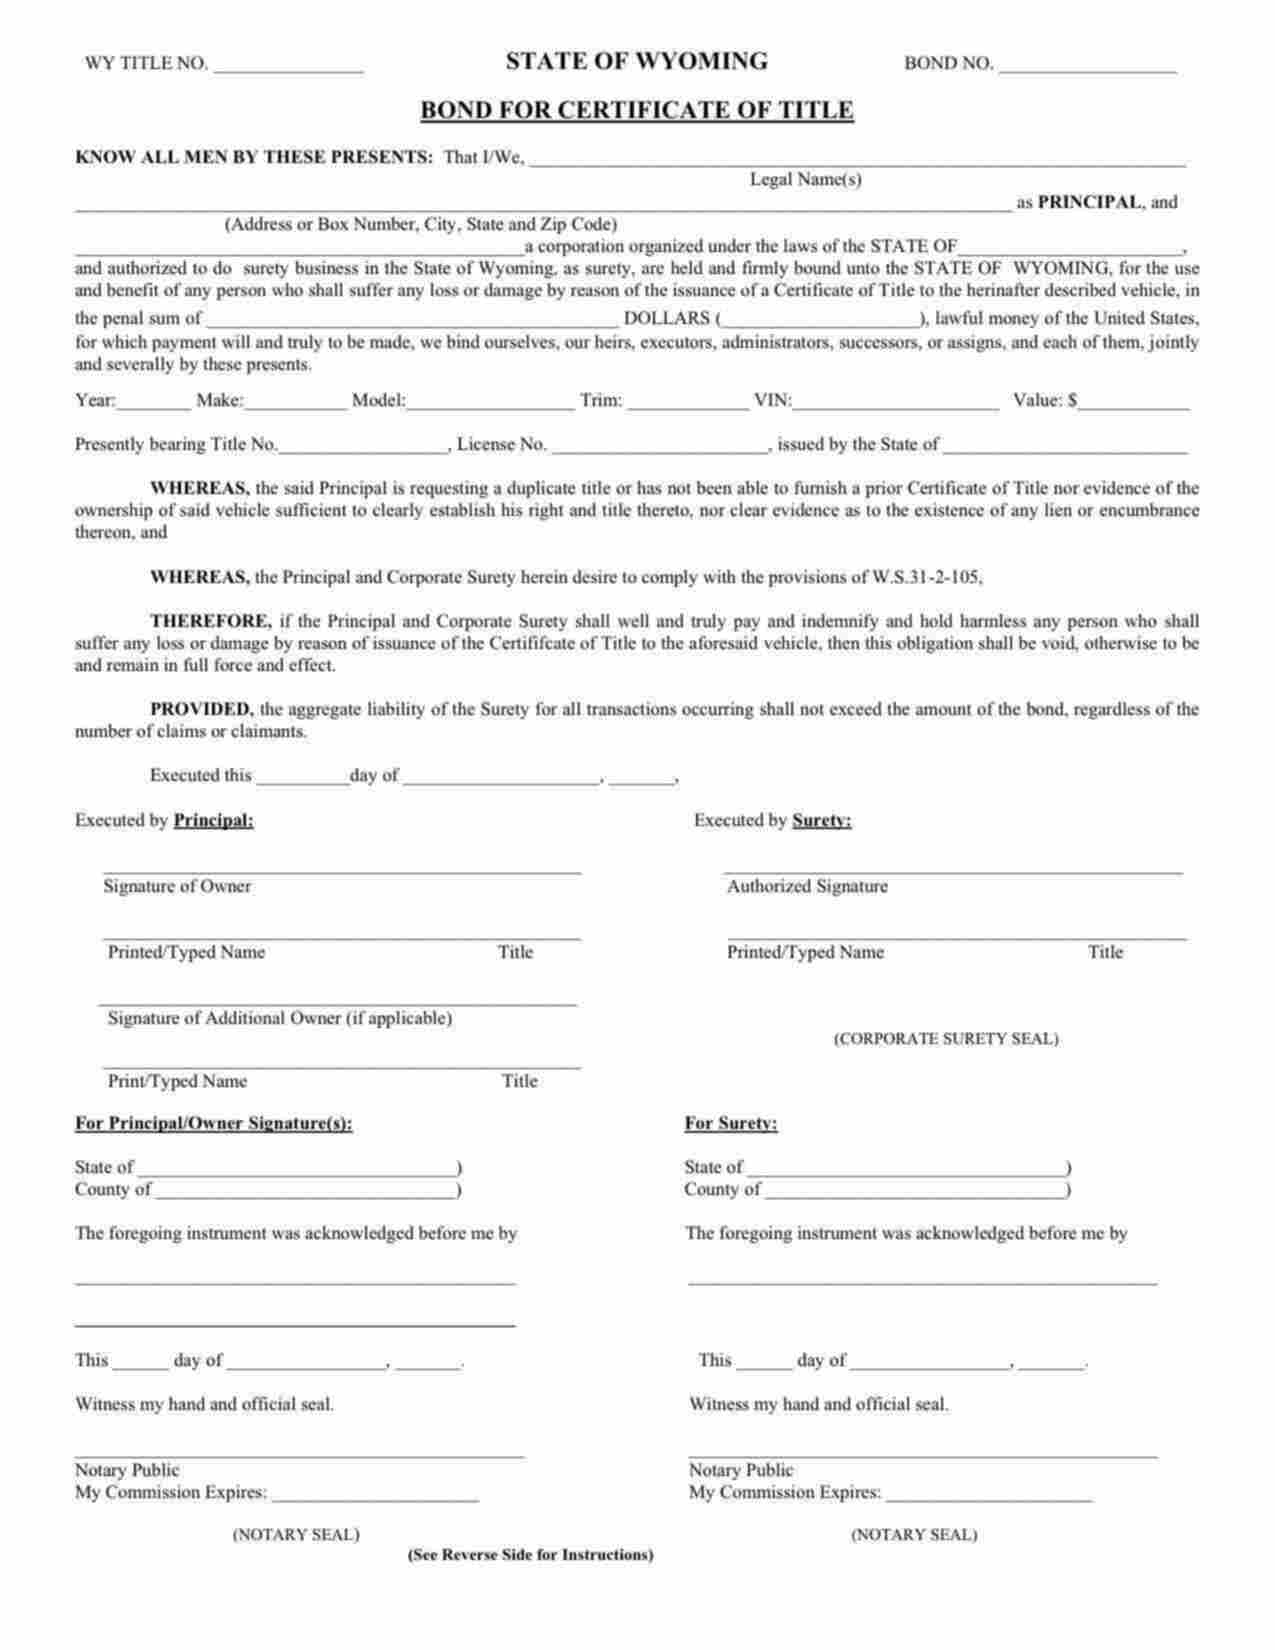 Wyoming Lost Certificate of Title Bond Form